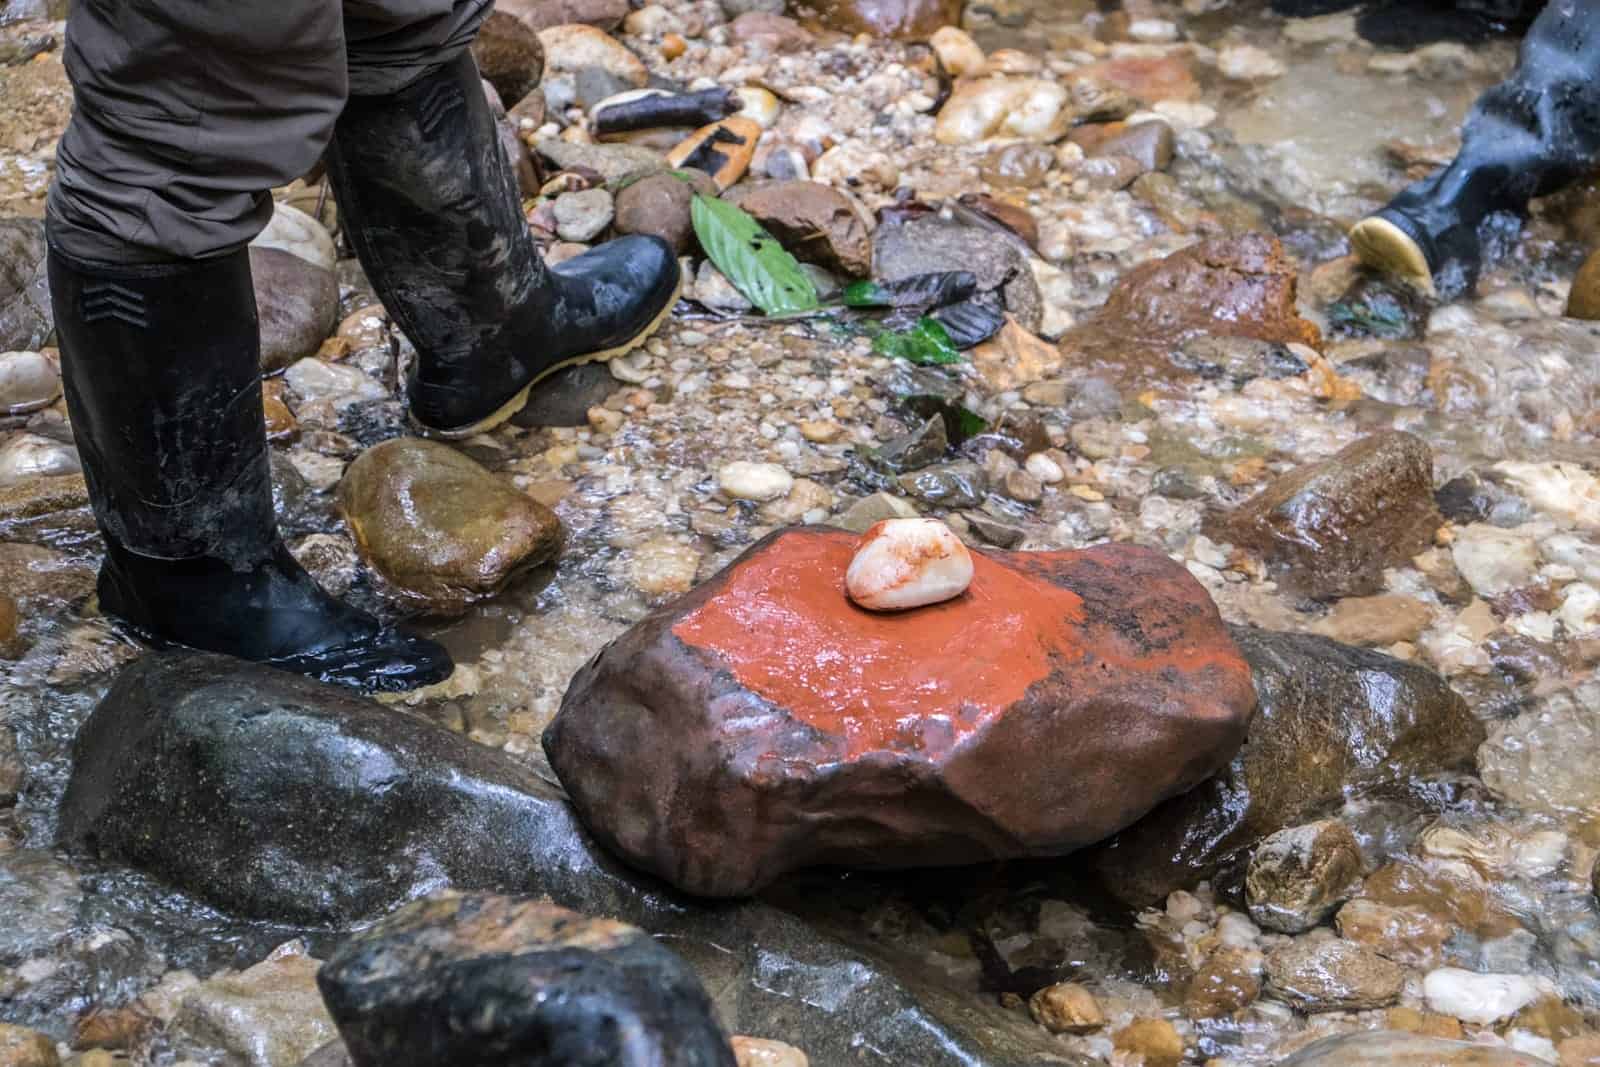 A person in black boots stands next to a large stone, covered in natural red clay dye with a small white stone on top.